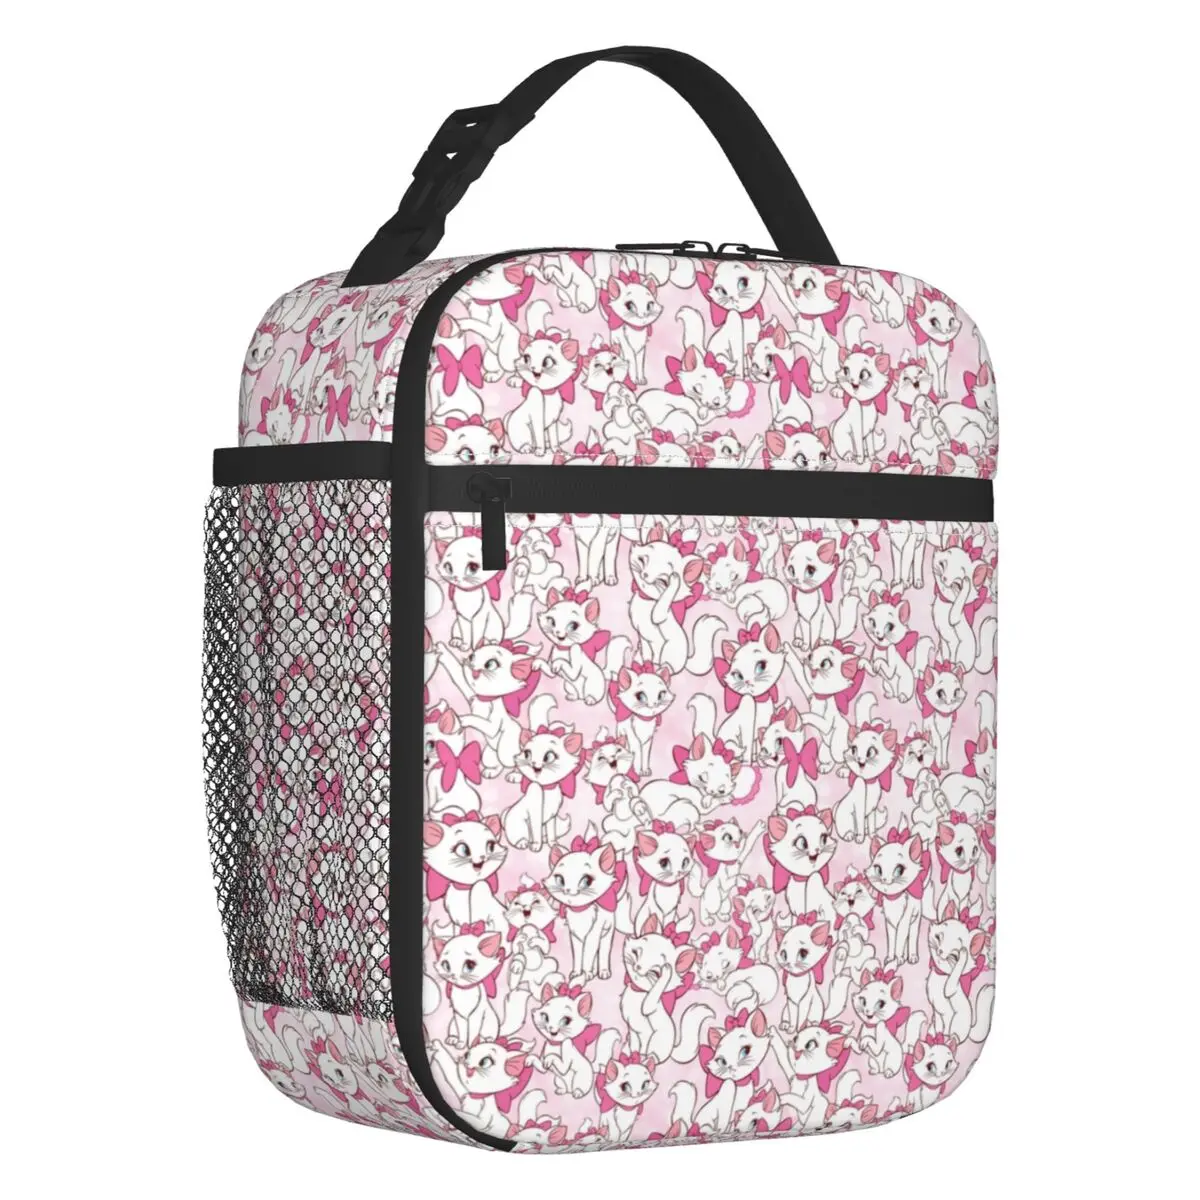 Marie With Her Pink Bow Insulated Lunch Bag for Camping Travel Girly Cat Film Portable Thermal Cooler Bento Box Women Children